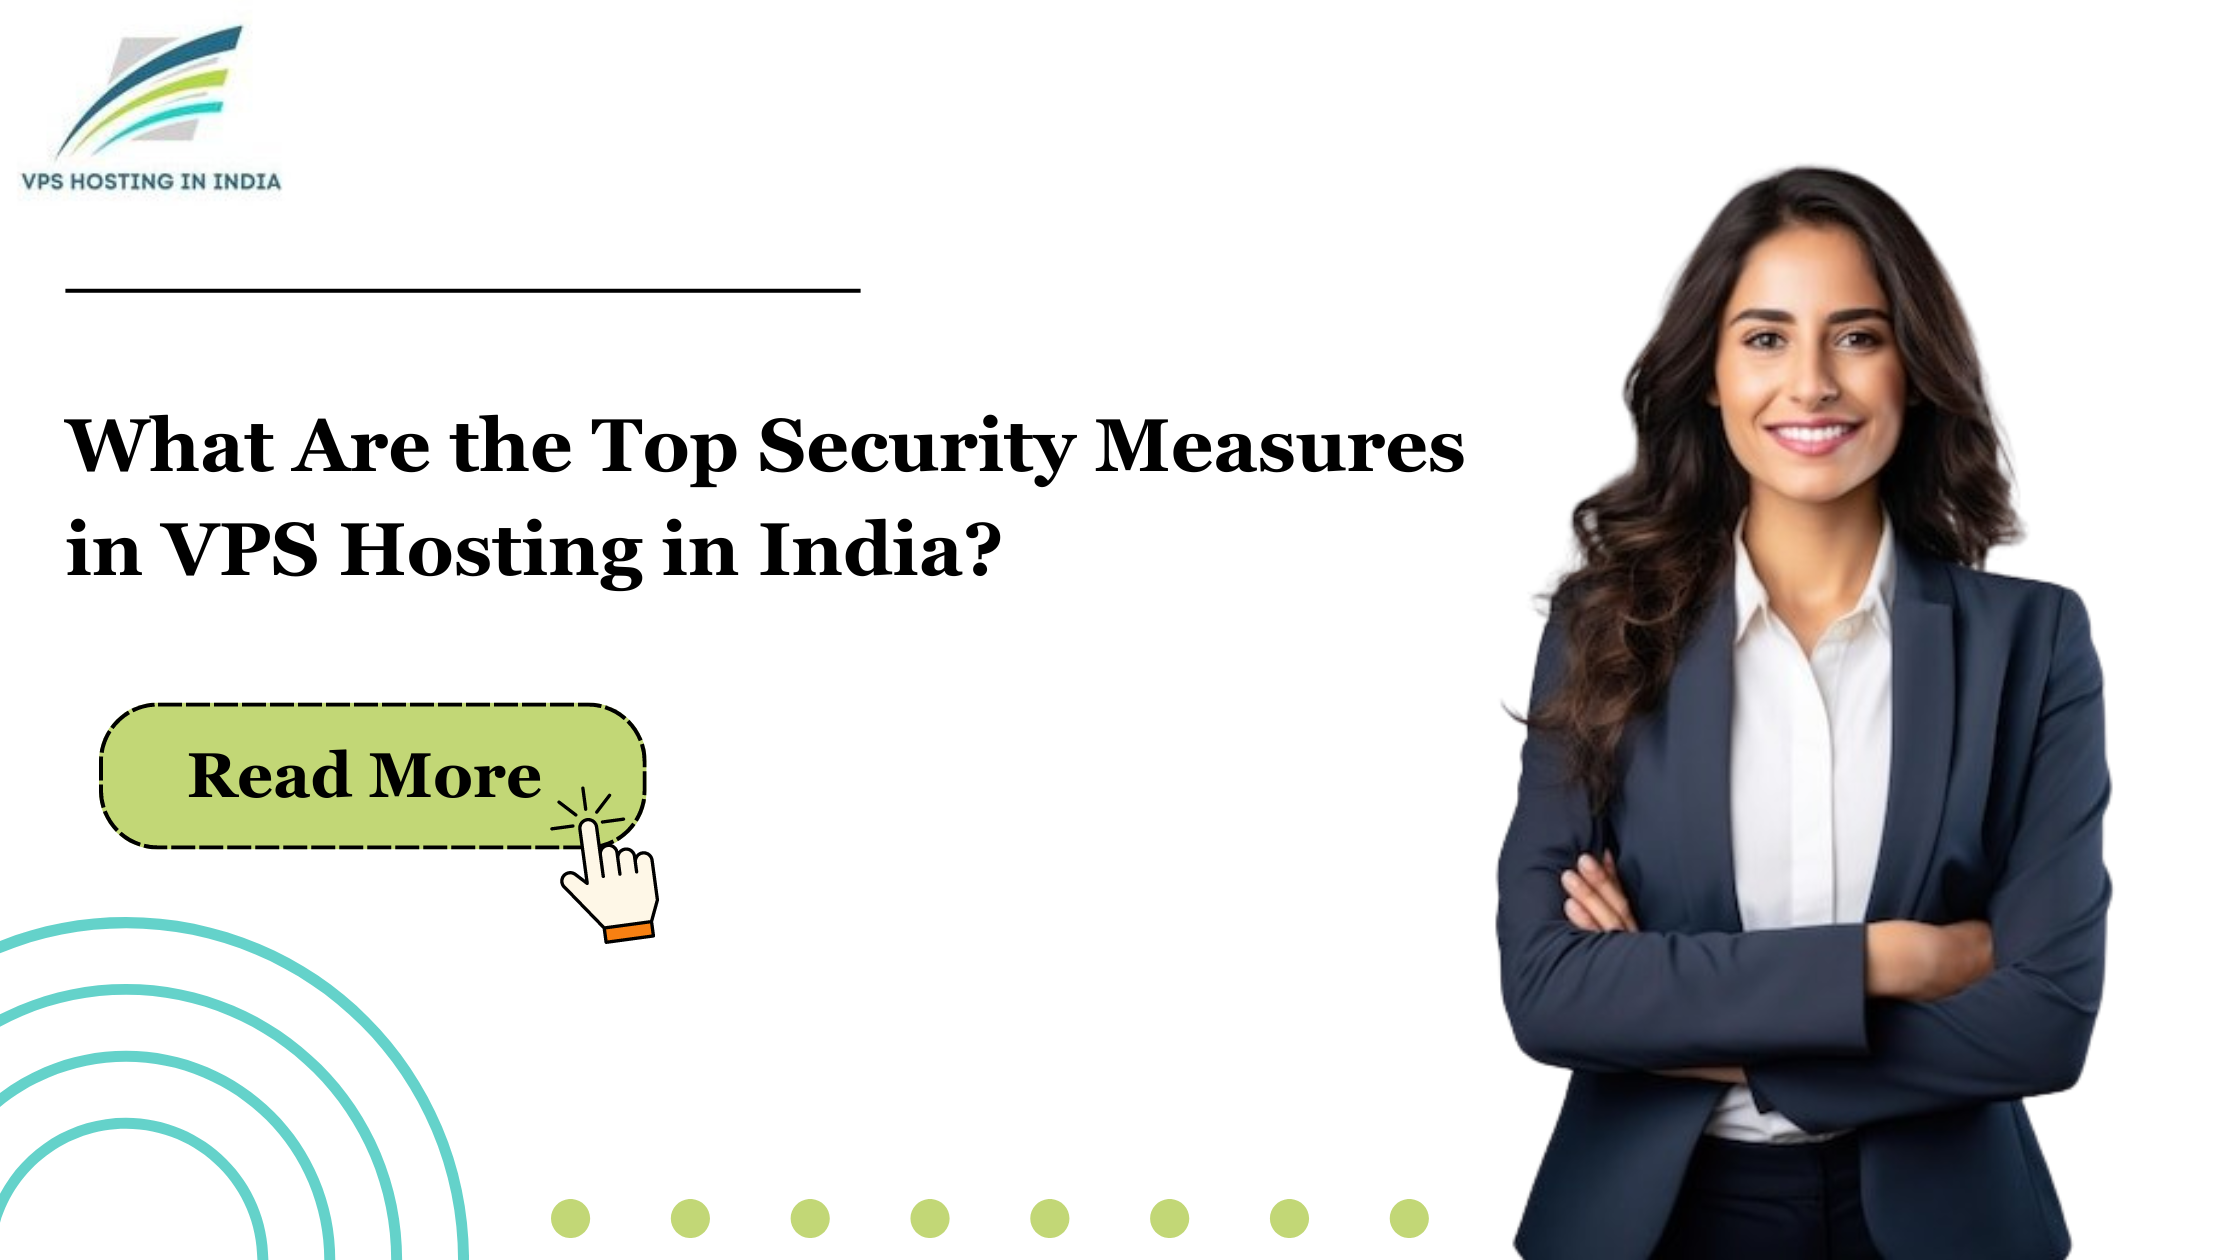 What Are the Top Security Measures in VPS Hosting in India